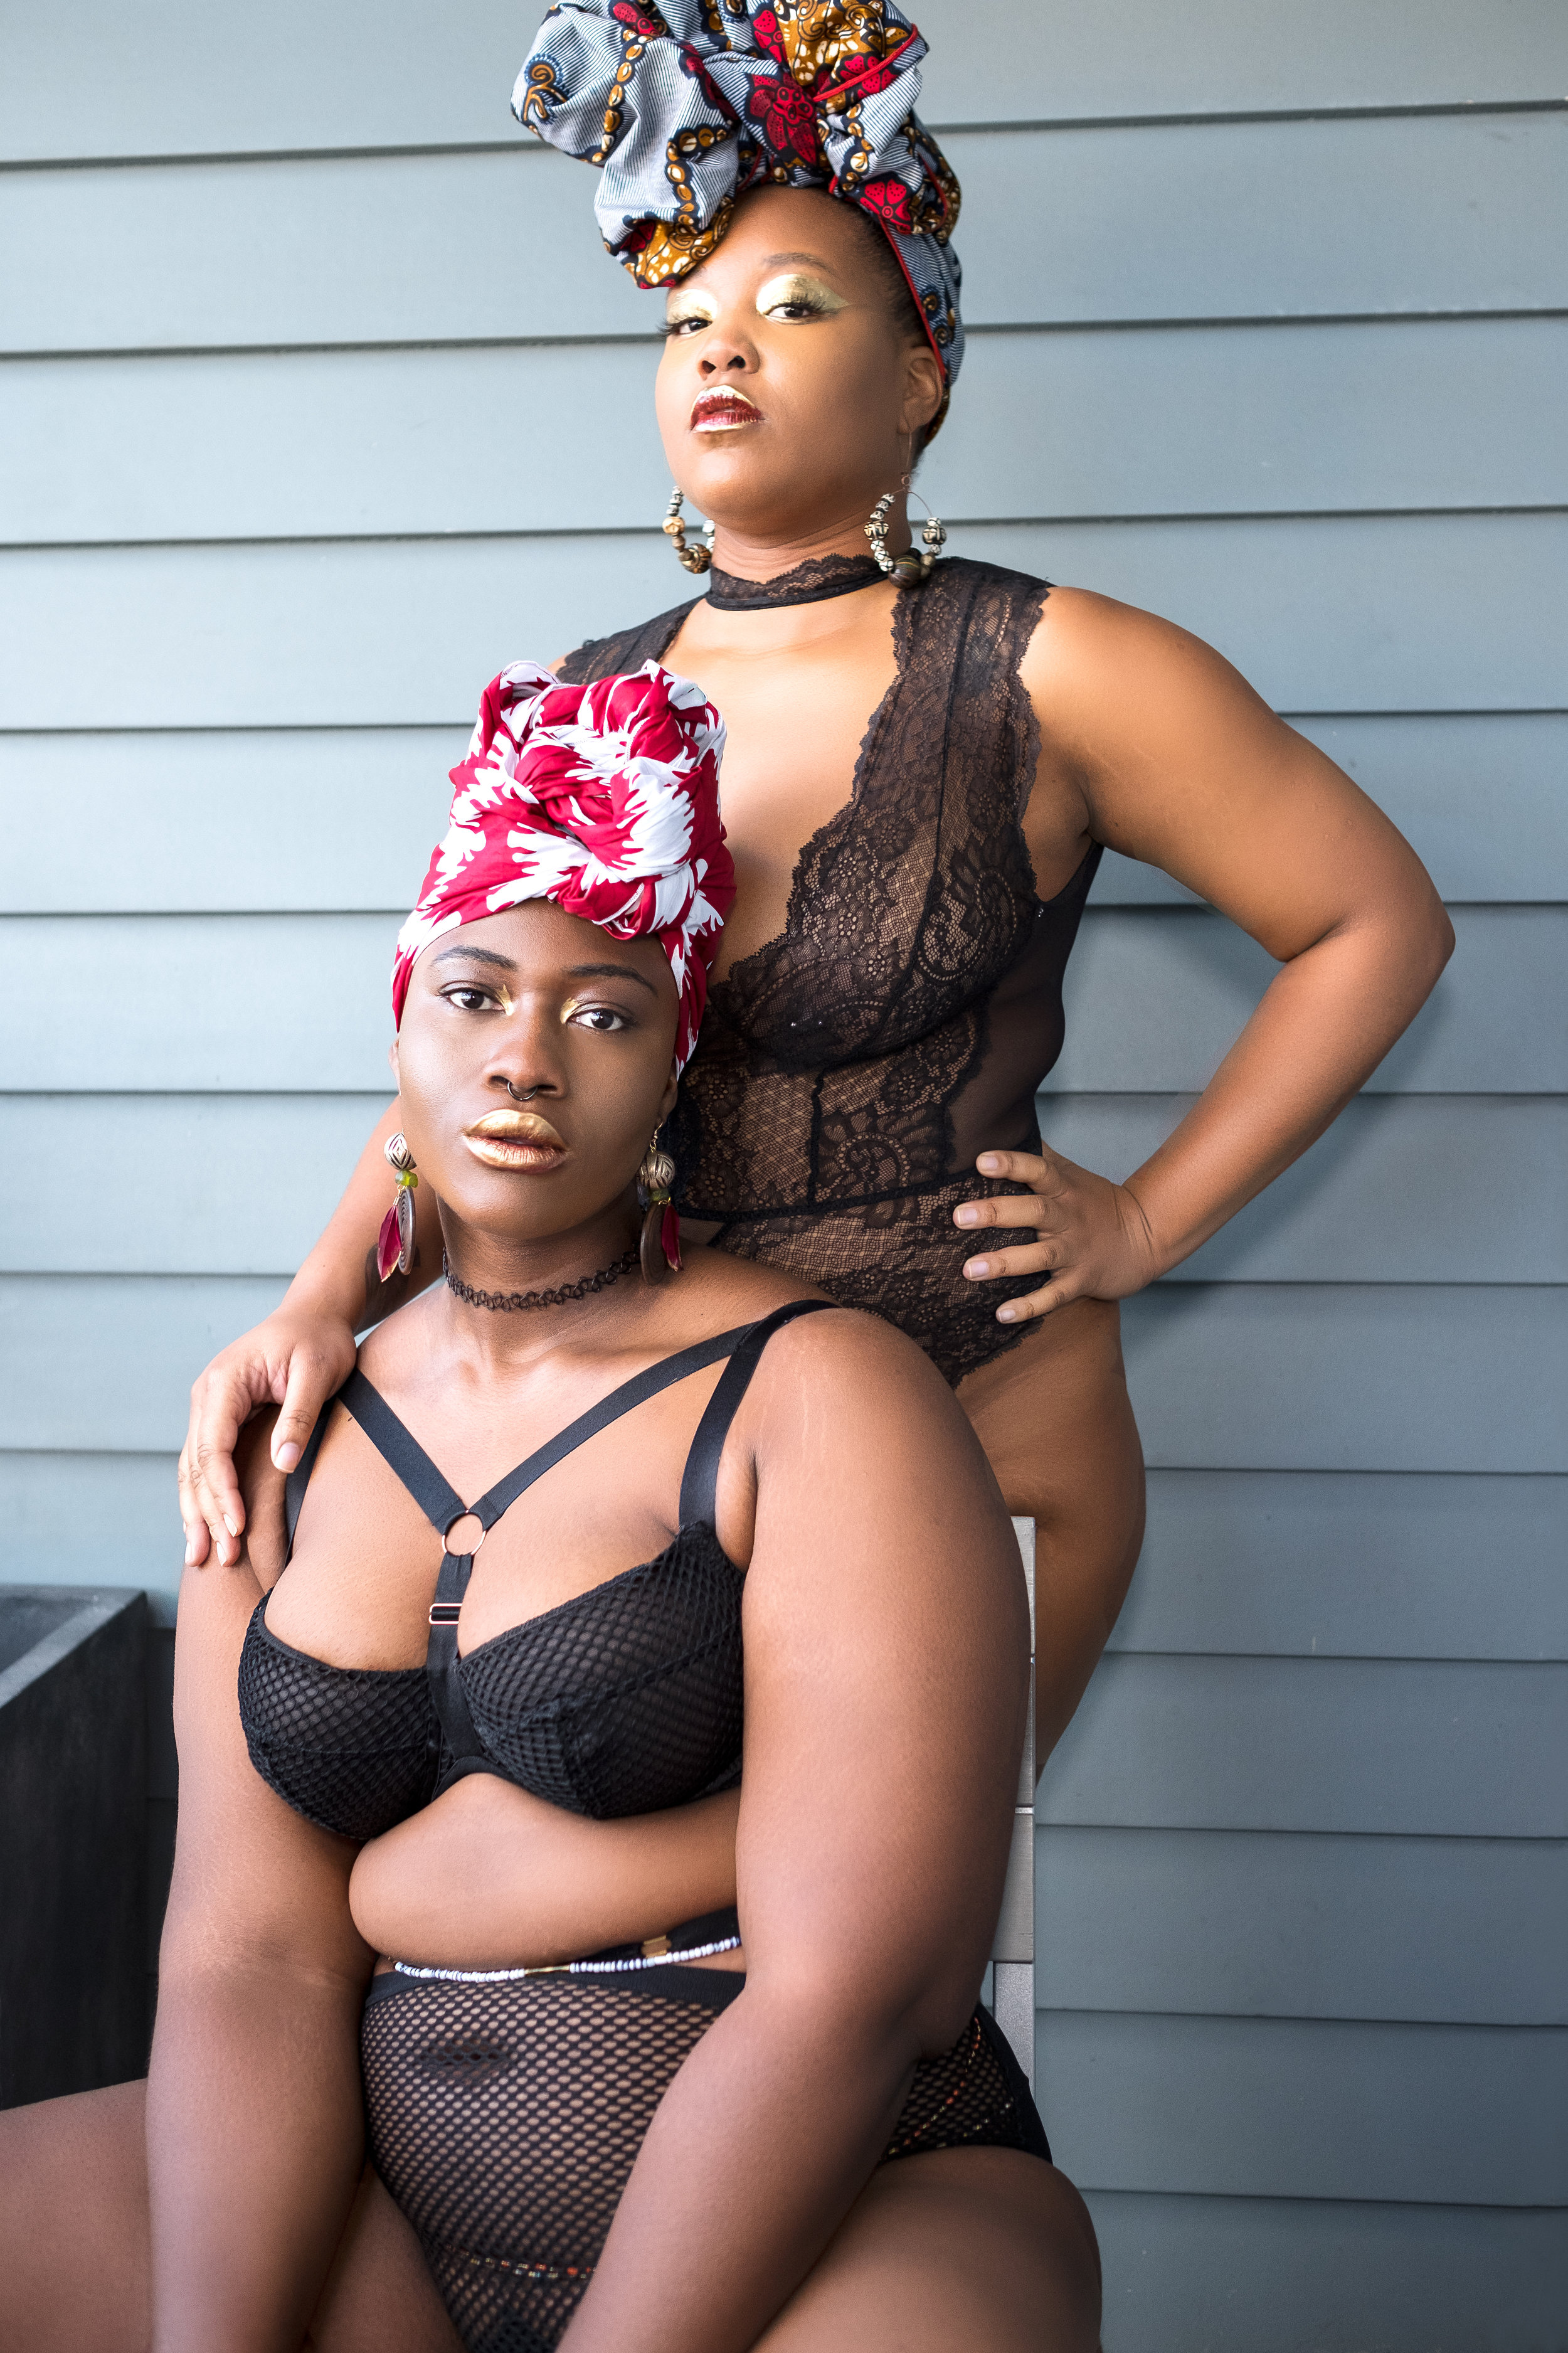 The Fat, Black, Femme, Queer Chronicles Demanding to Be Seen — The Unedit